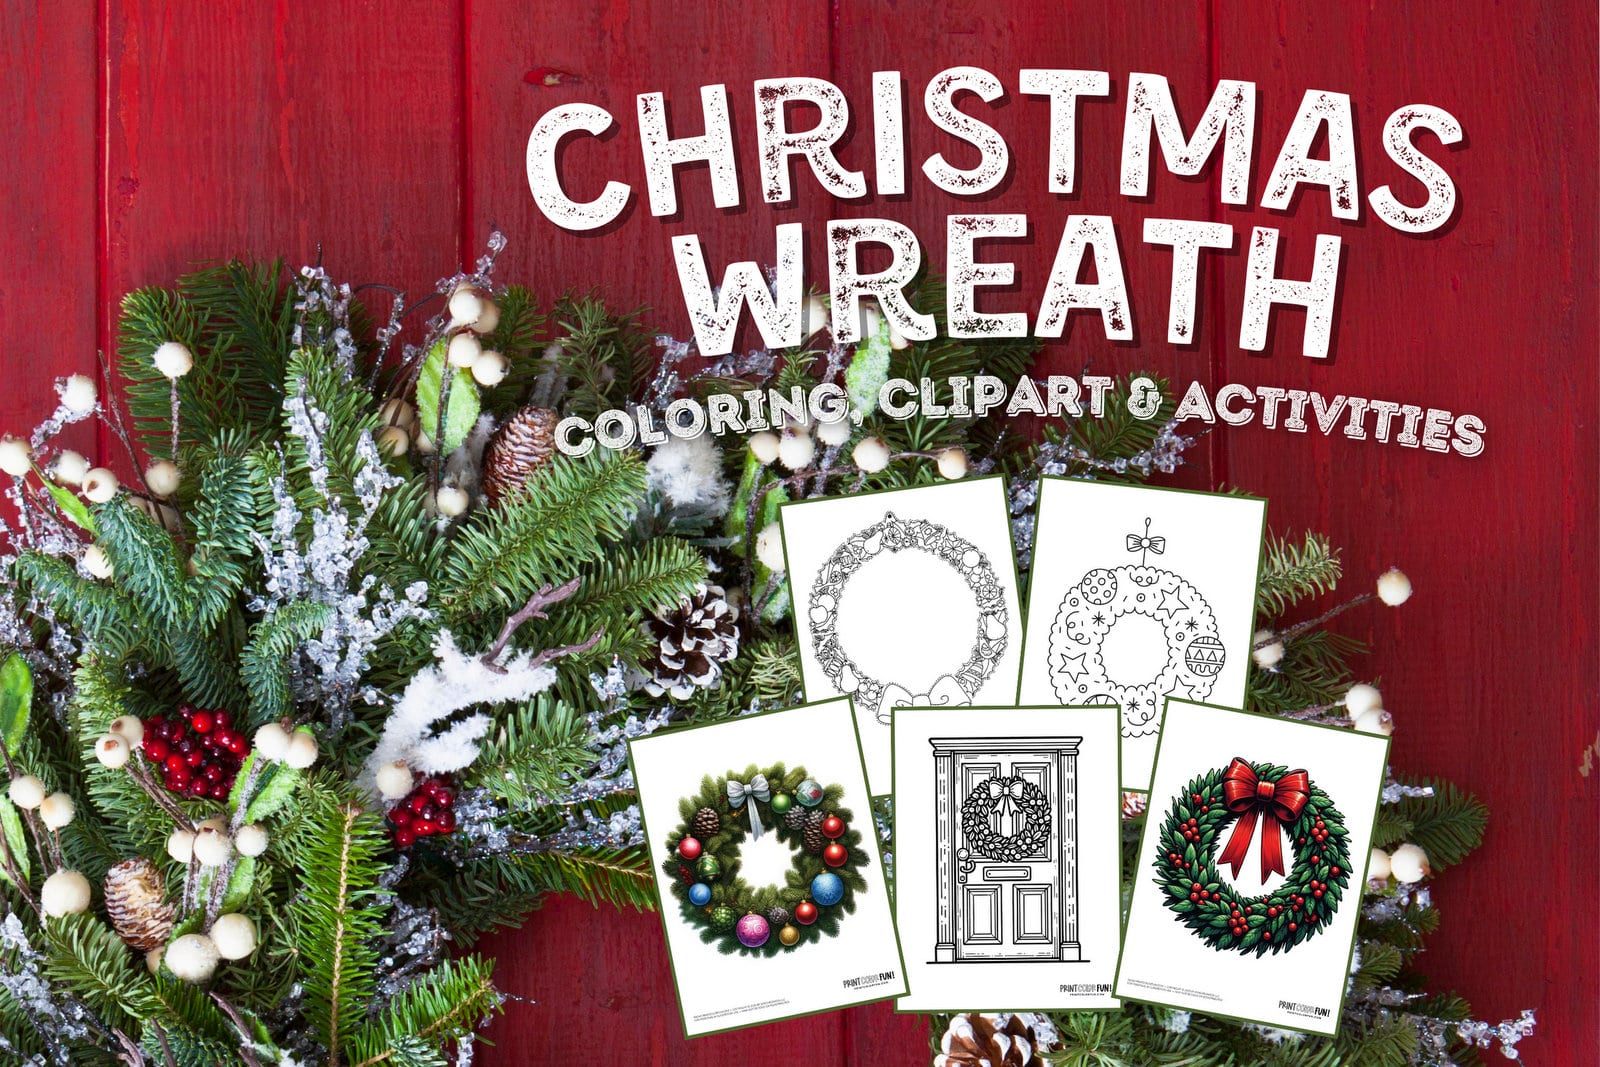 Christmas wreath coloring page clipart activities from PrintColorFun com